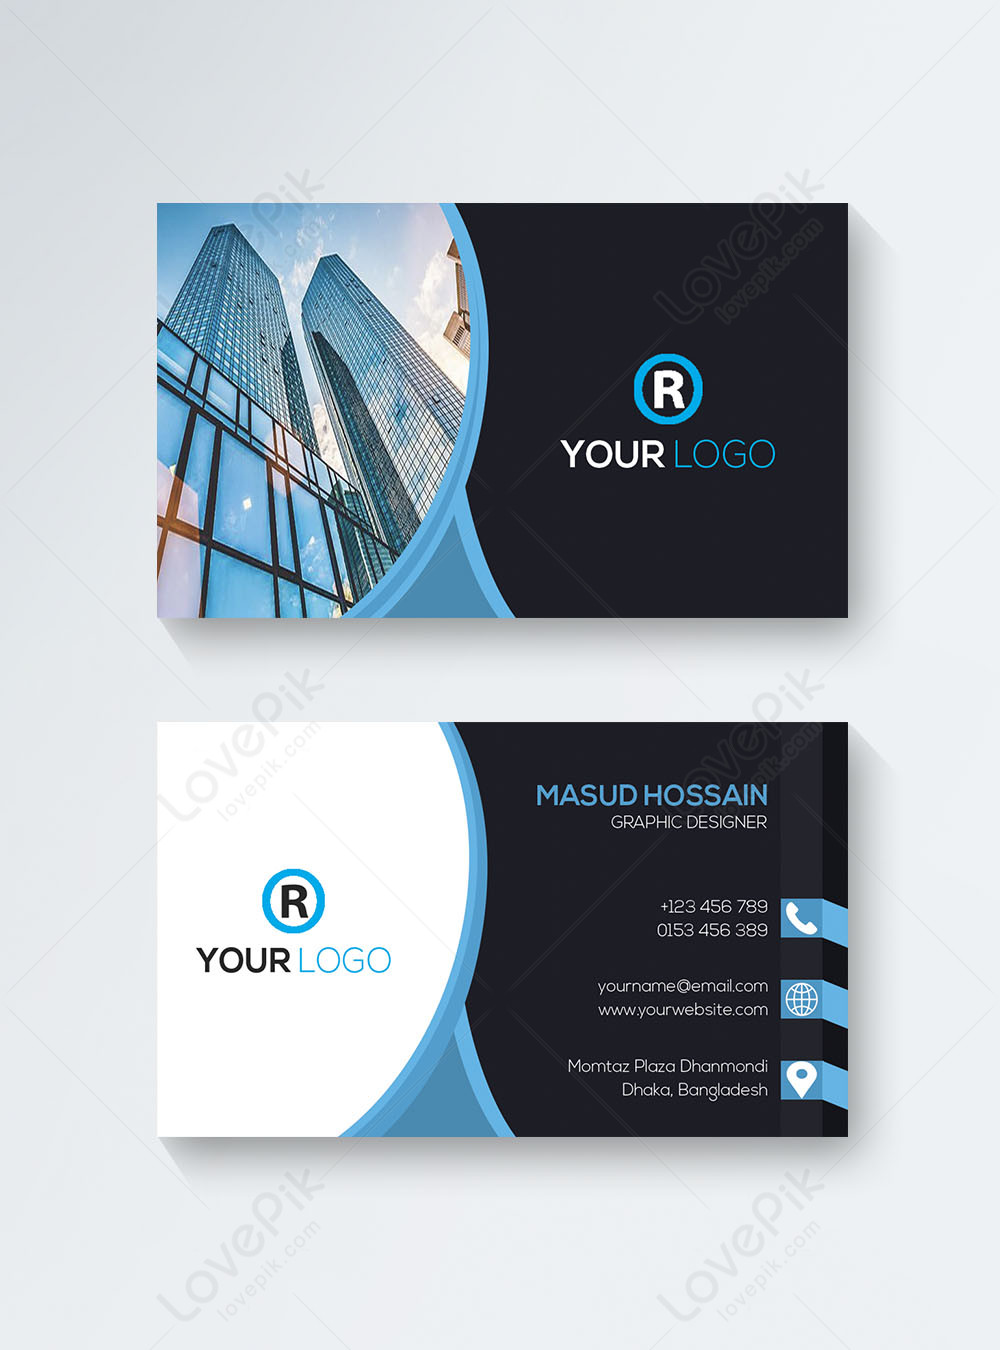 Blue and black real estate business card template image_picture With Regard To Real Estate Business Cards Templates Free